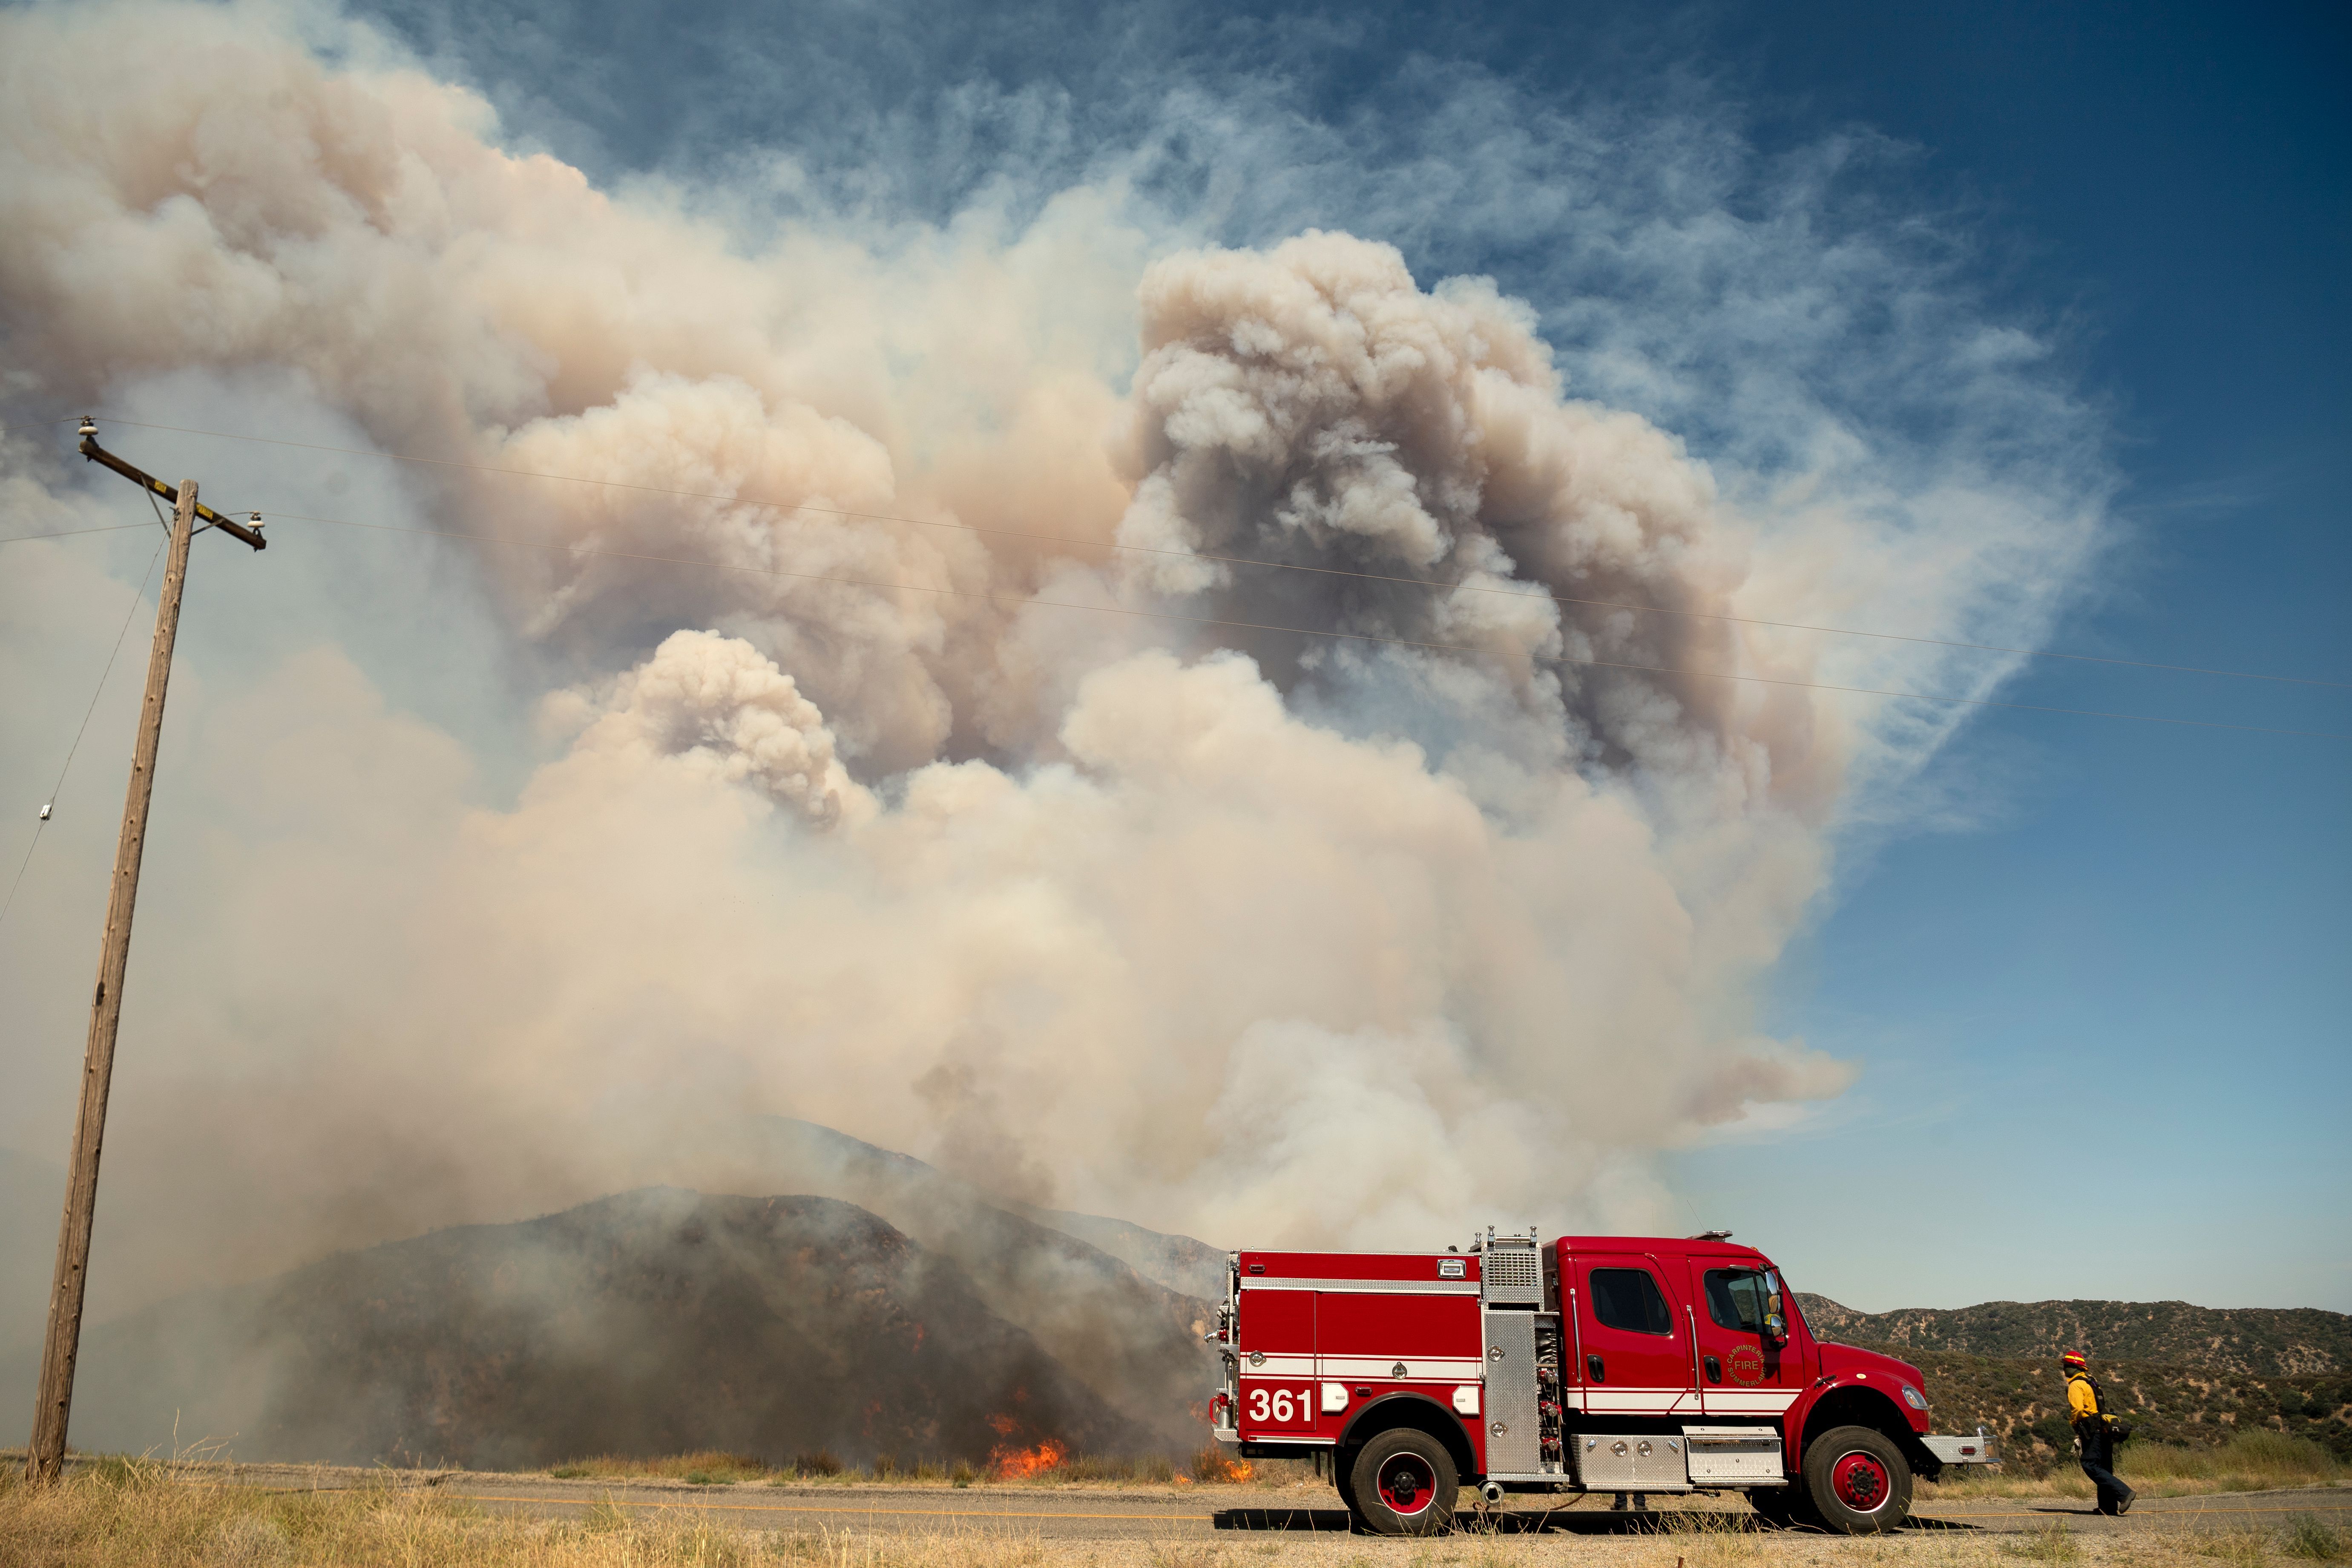 A firefighter walks back to his truck near a pyrocumulus ash plume during the Apple fire near Banning, California on August 1